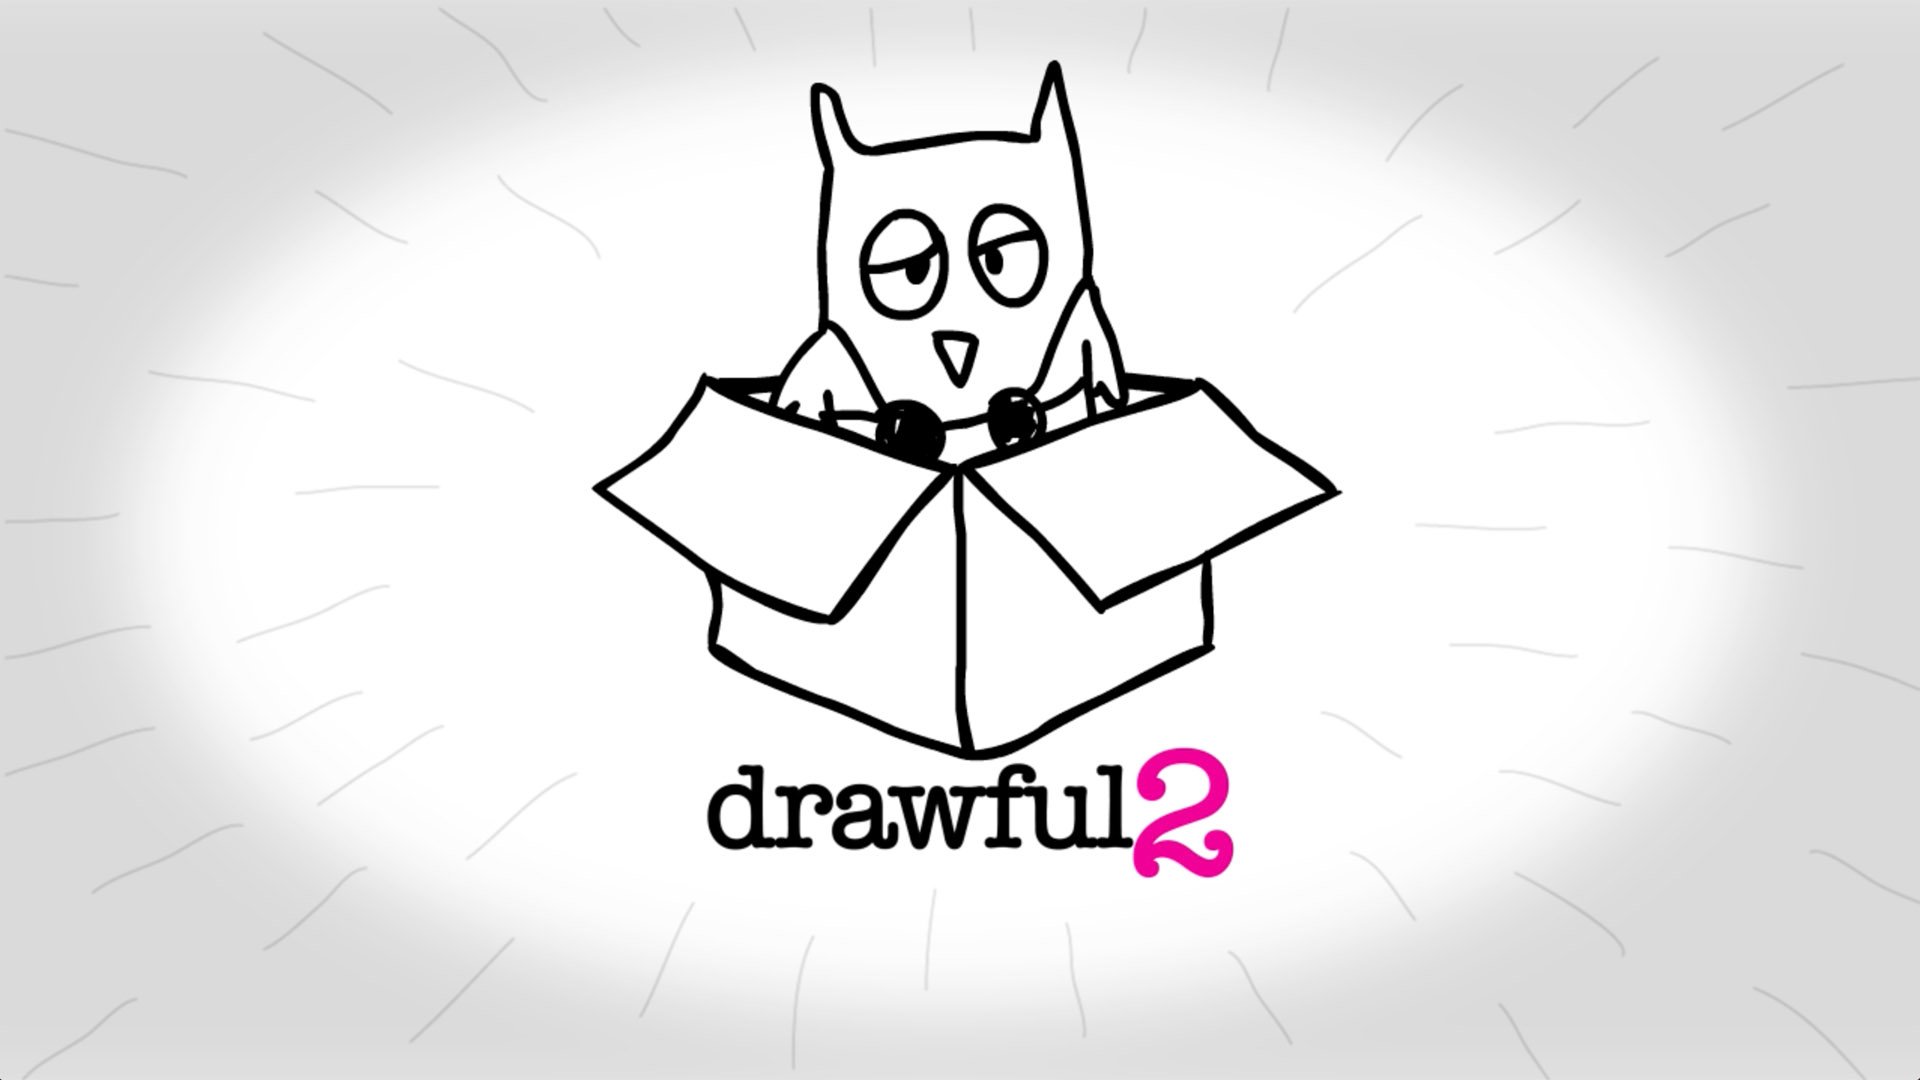 Drawful 2 will finally realize the dream of with two colors at once –